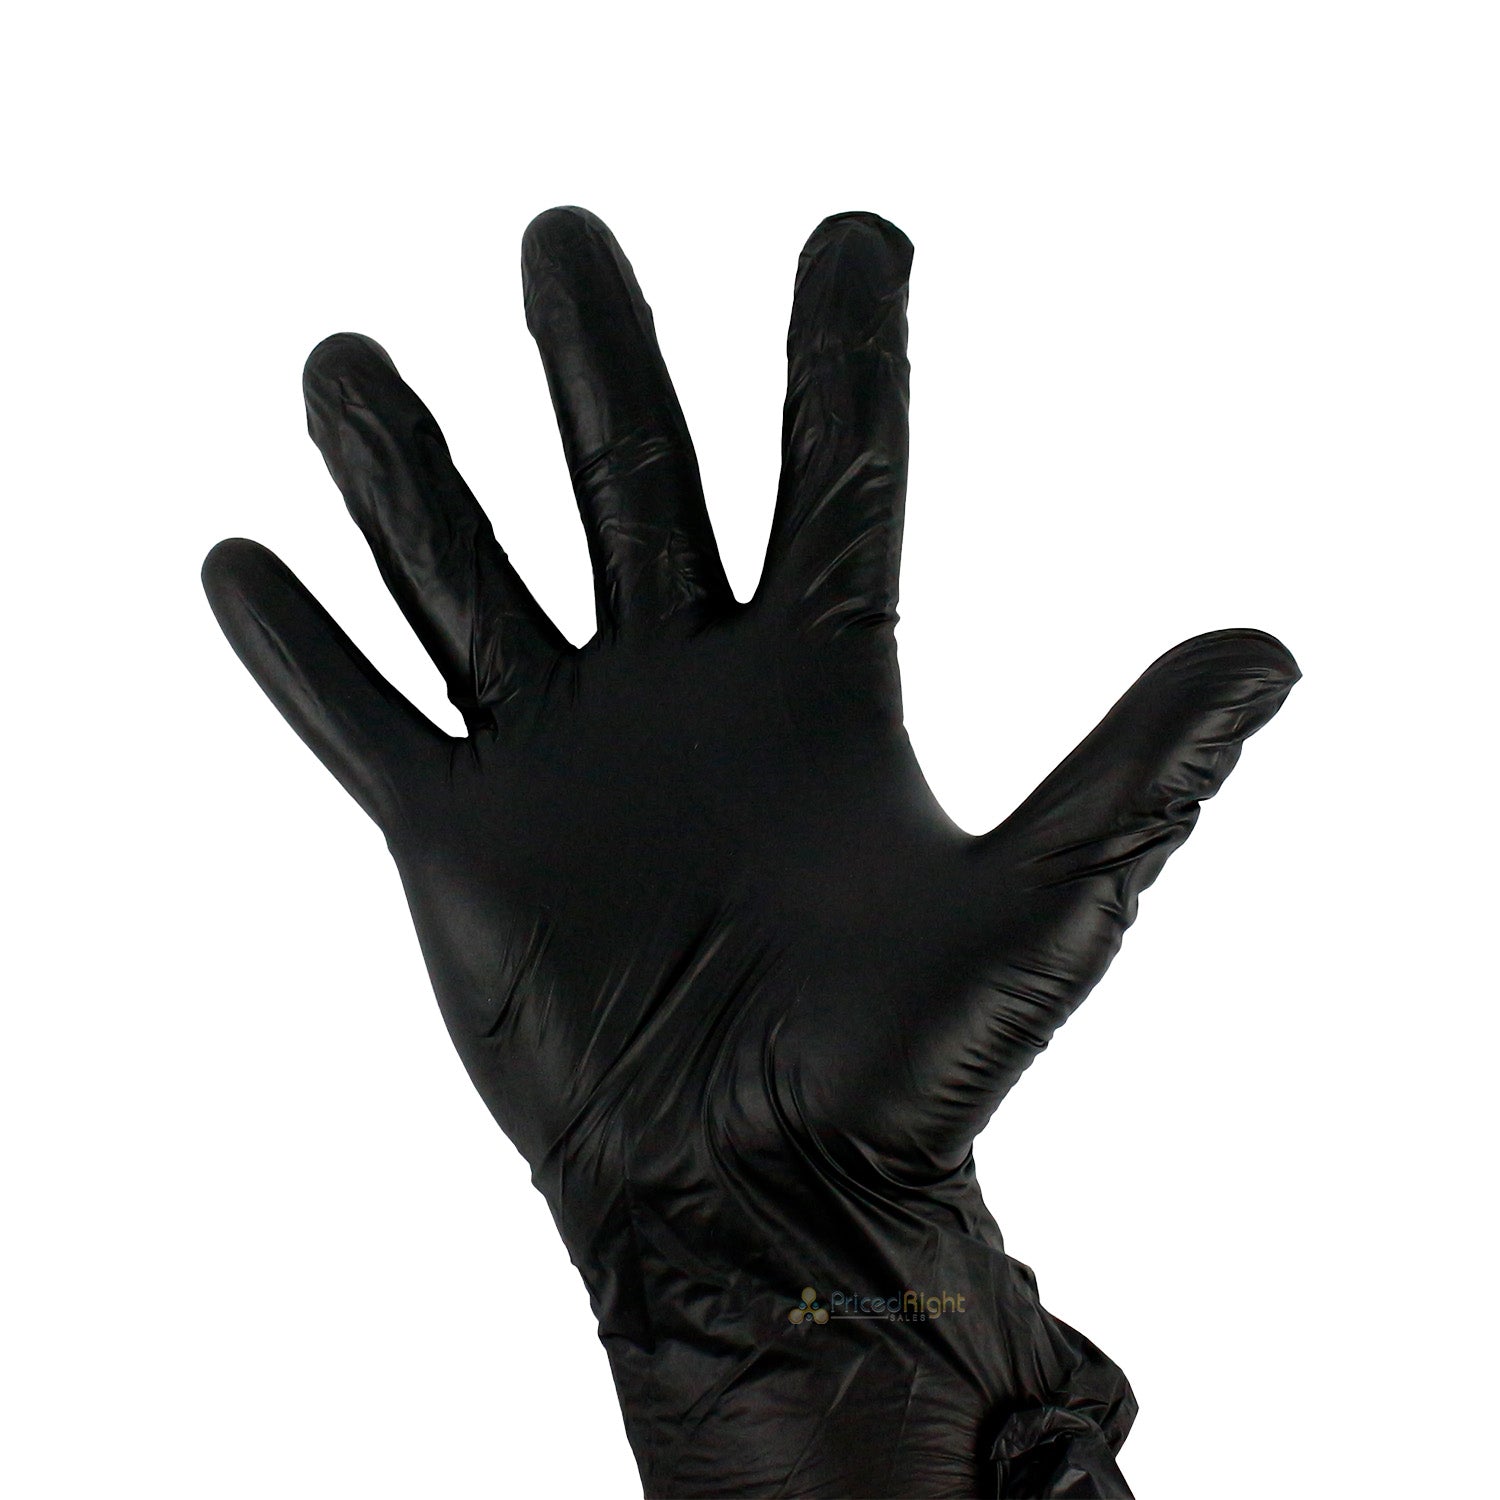 10 Pack Large Vinyl And Nitrile Gloves 1,000 In A Case Powder And Latex Free